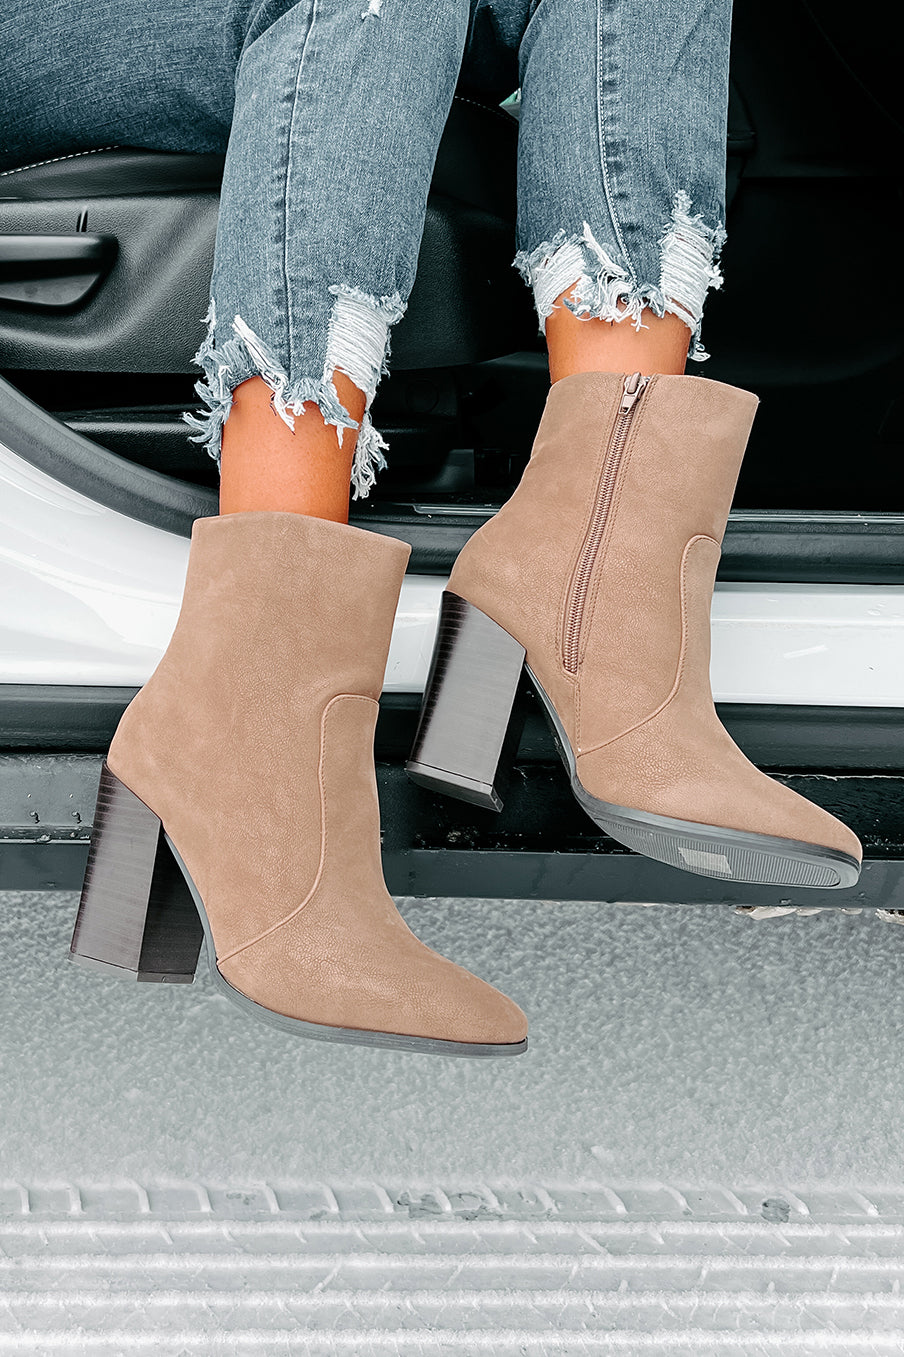 Extra Bossy Faux Suede Booties (Taupe) - NanaMacs